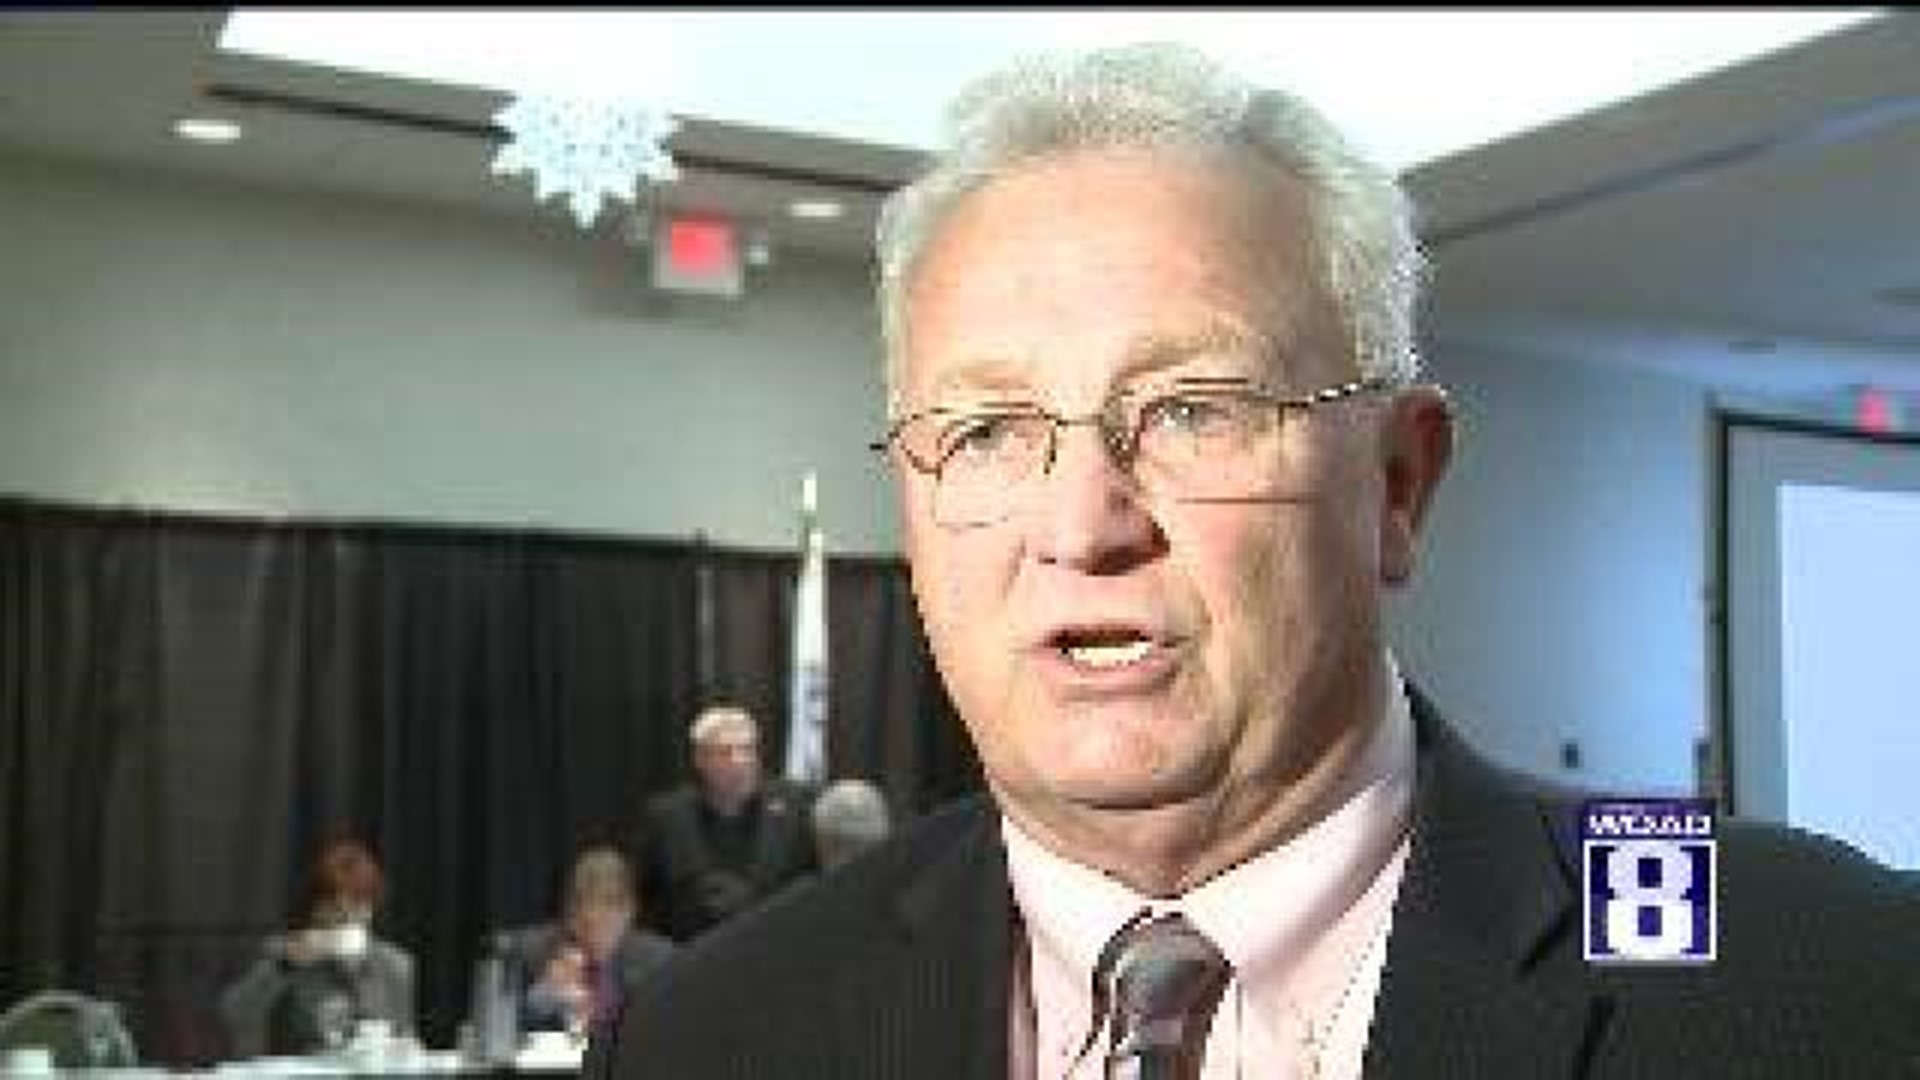 Moline Mayor delivers final State of the City address